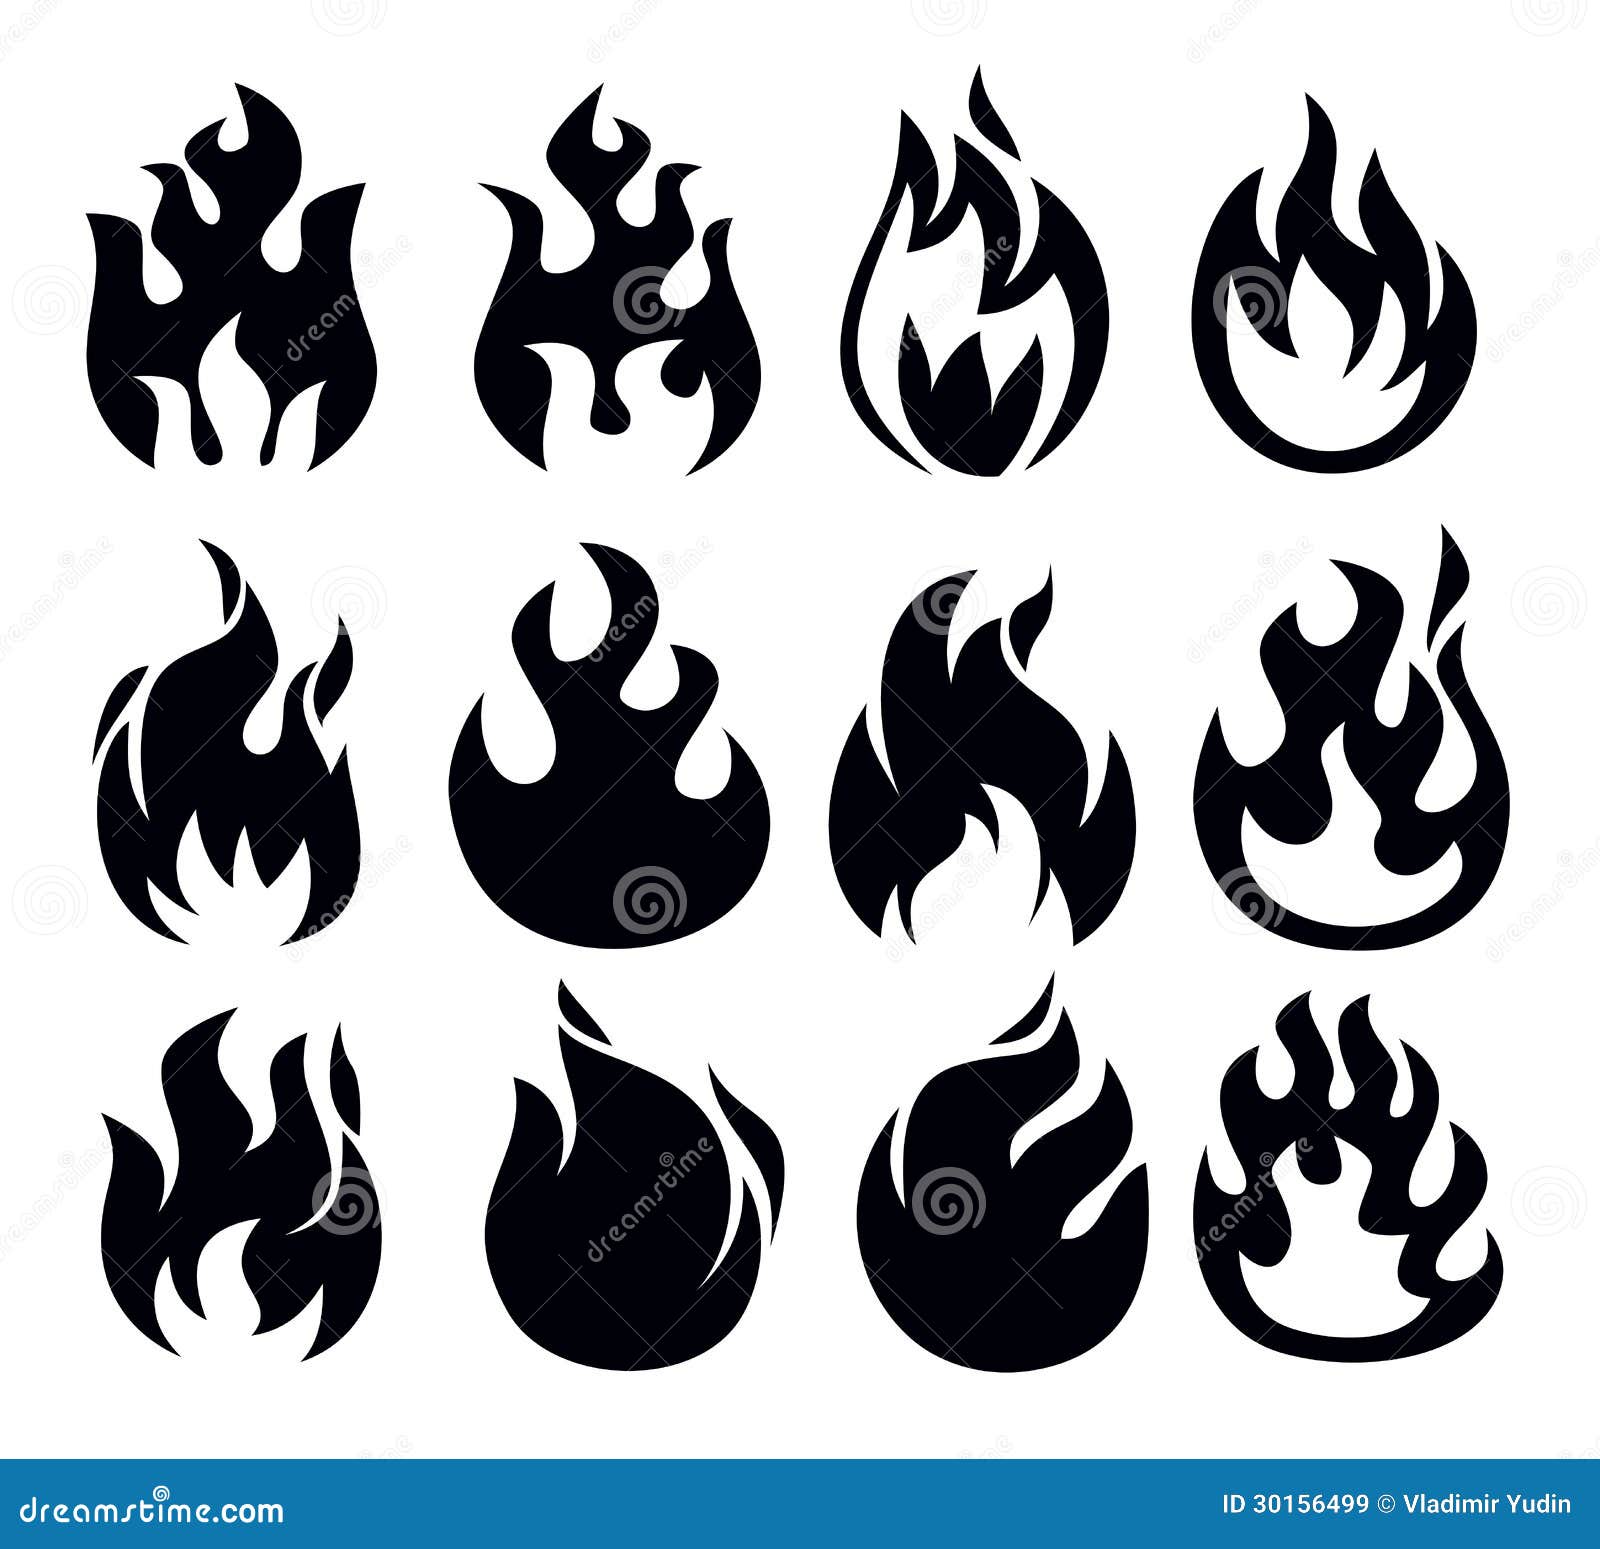 fire clipart black and white - photo #48